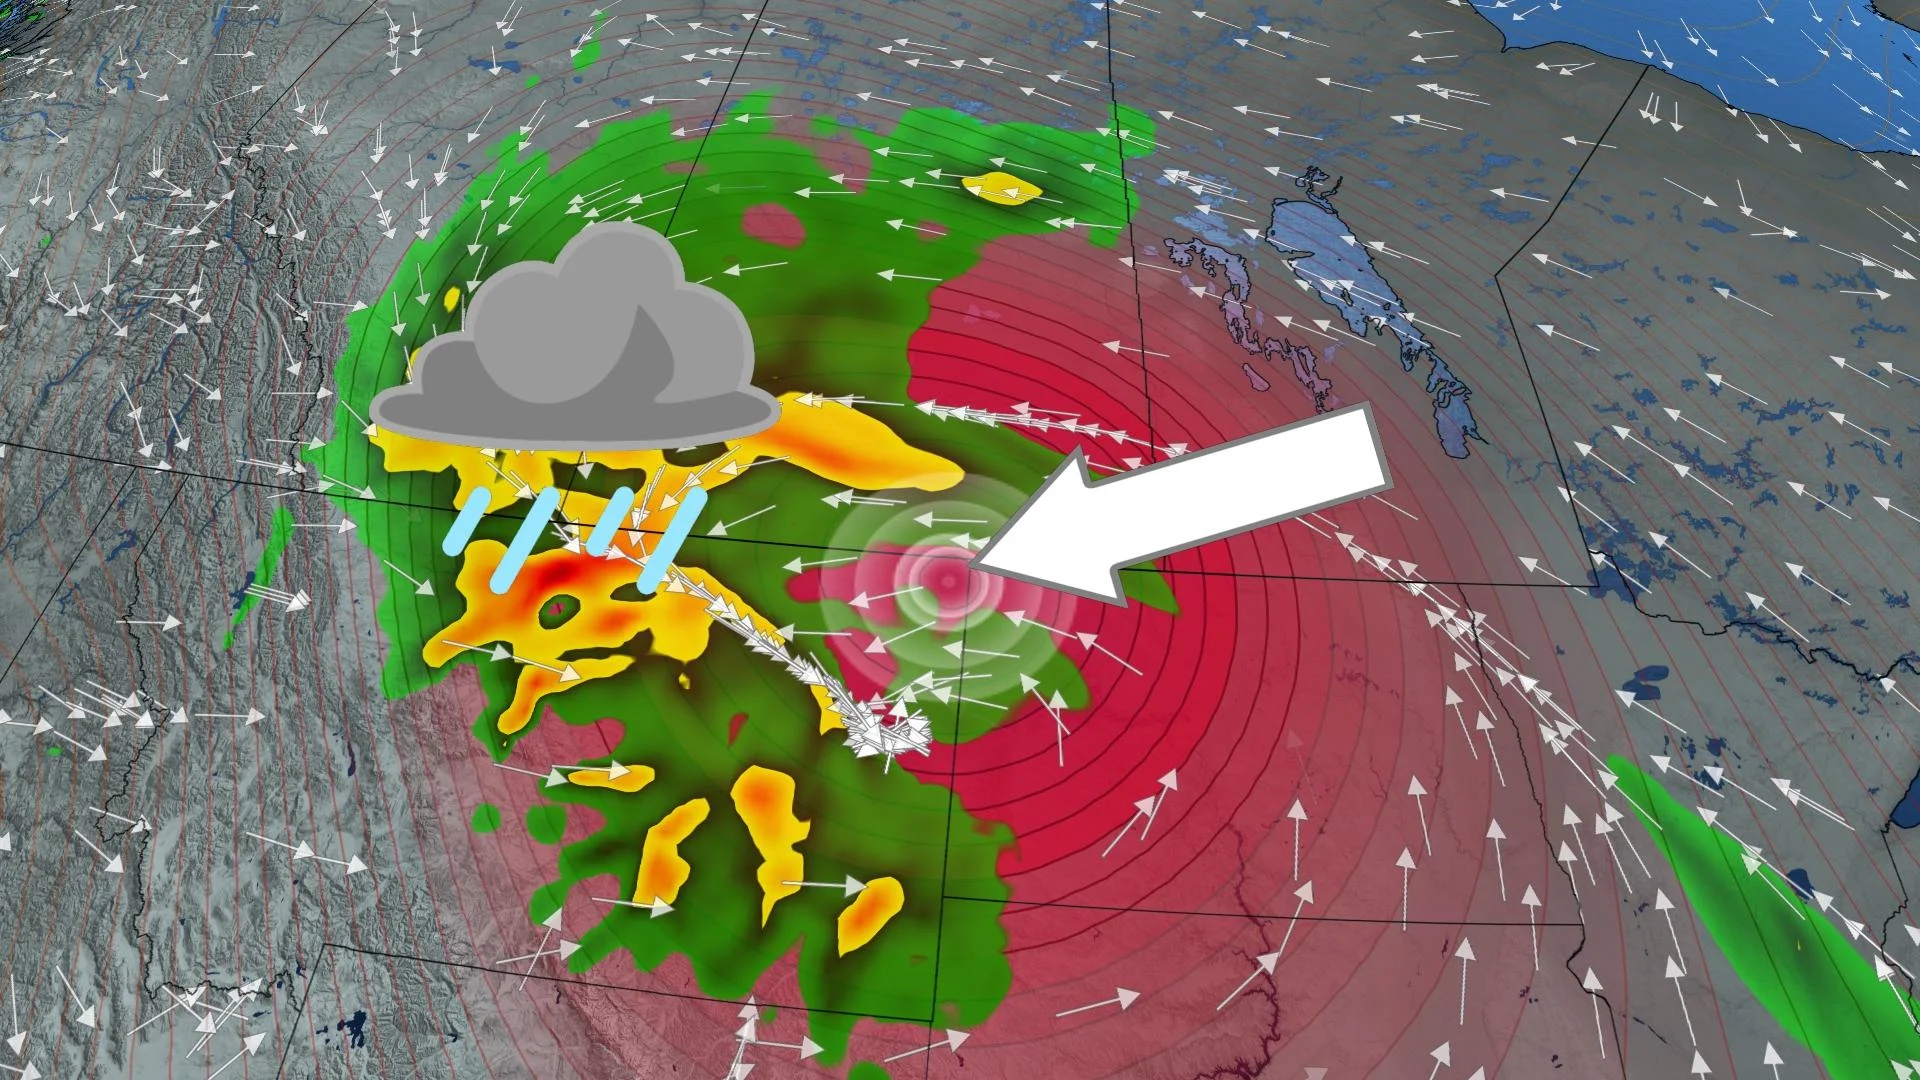 Manitoba is in line for plenty of rain from this storm, which could be one of the strongest on record for the month of May